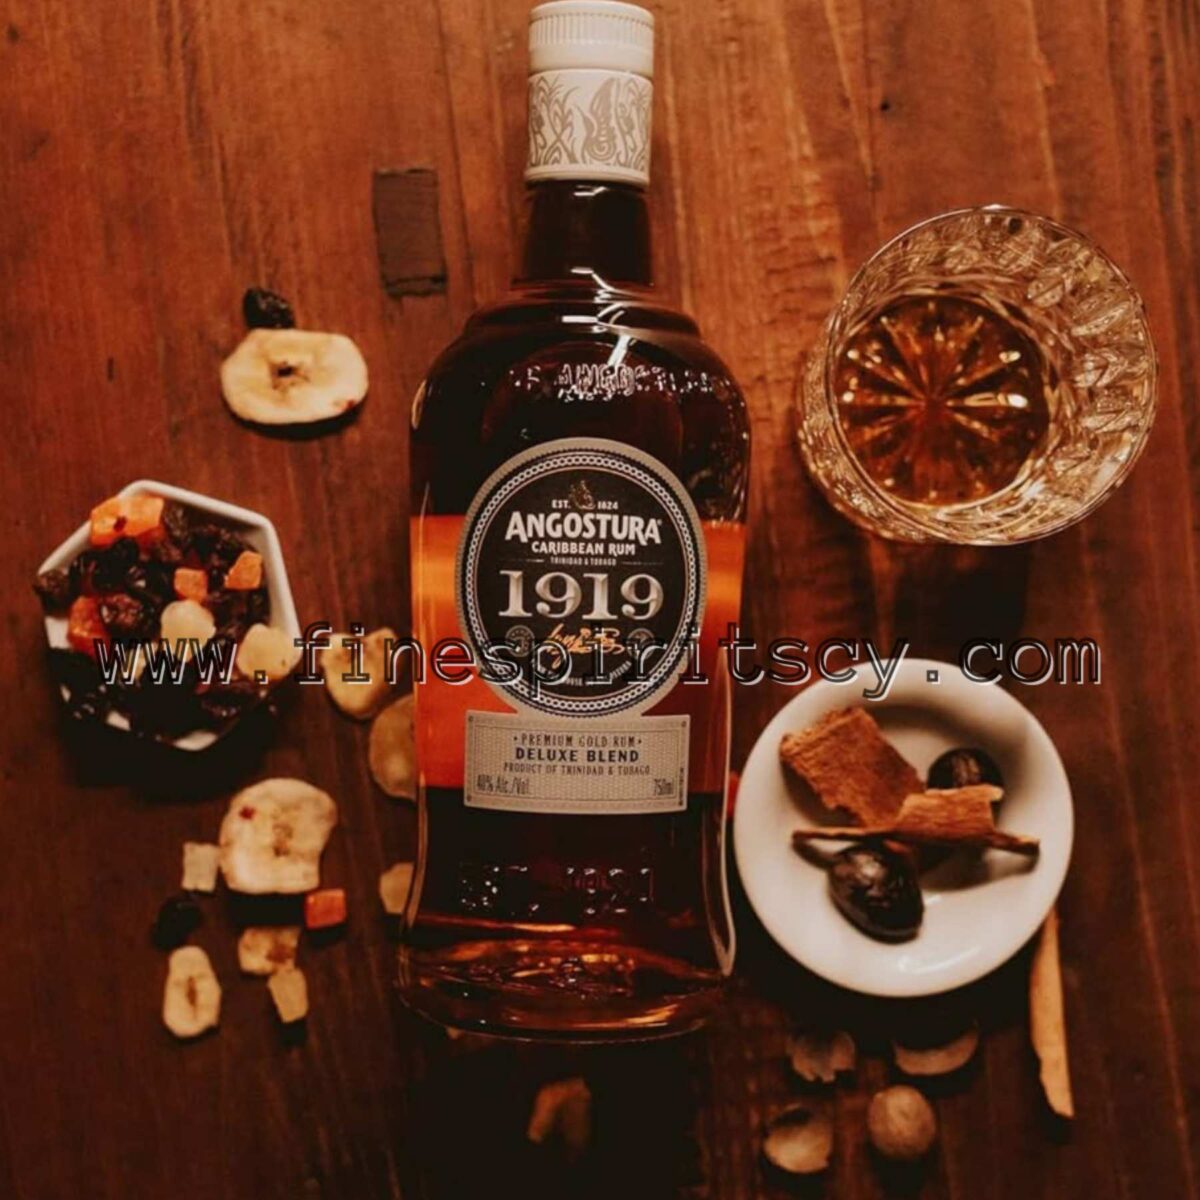 Angostura 1919 8 Year Old Caribbean Finest Rum